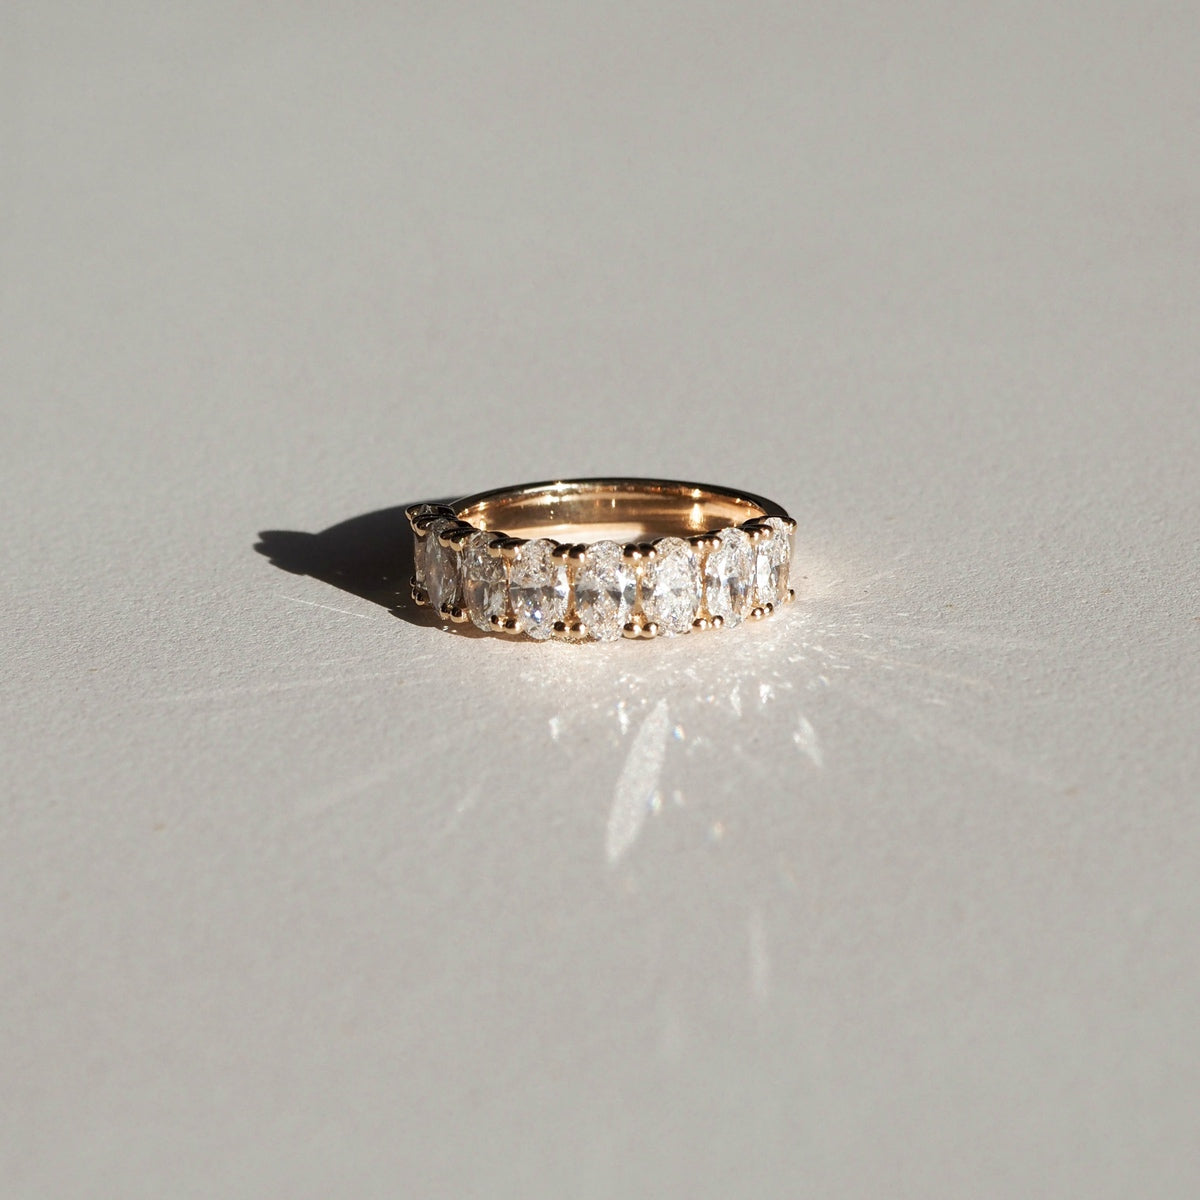 A half-infinity style ring, featuring an array of oval lab-grown diamonds that end and begin again — replicating the circular journey of true love. This piece is created with eight 5x3mm lab-grown oval cut diamonds, splayed along a round gold band. The total carat weight is approximately 1.60ct.